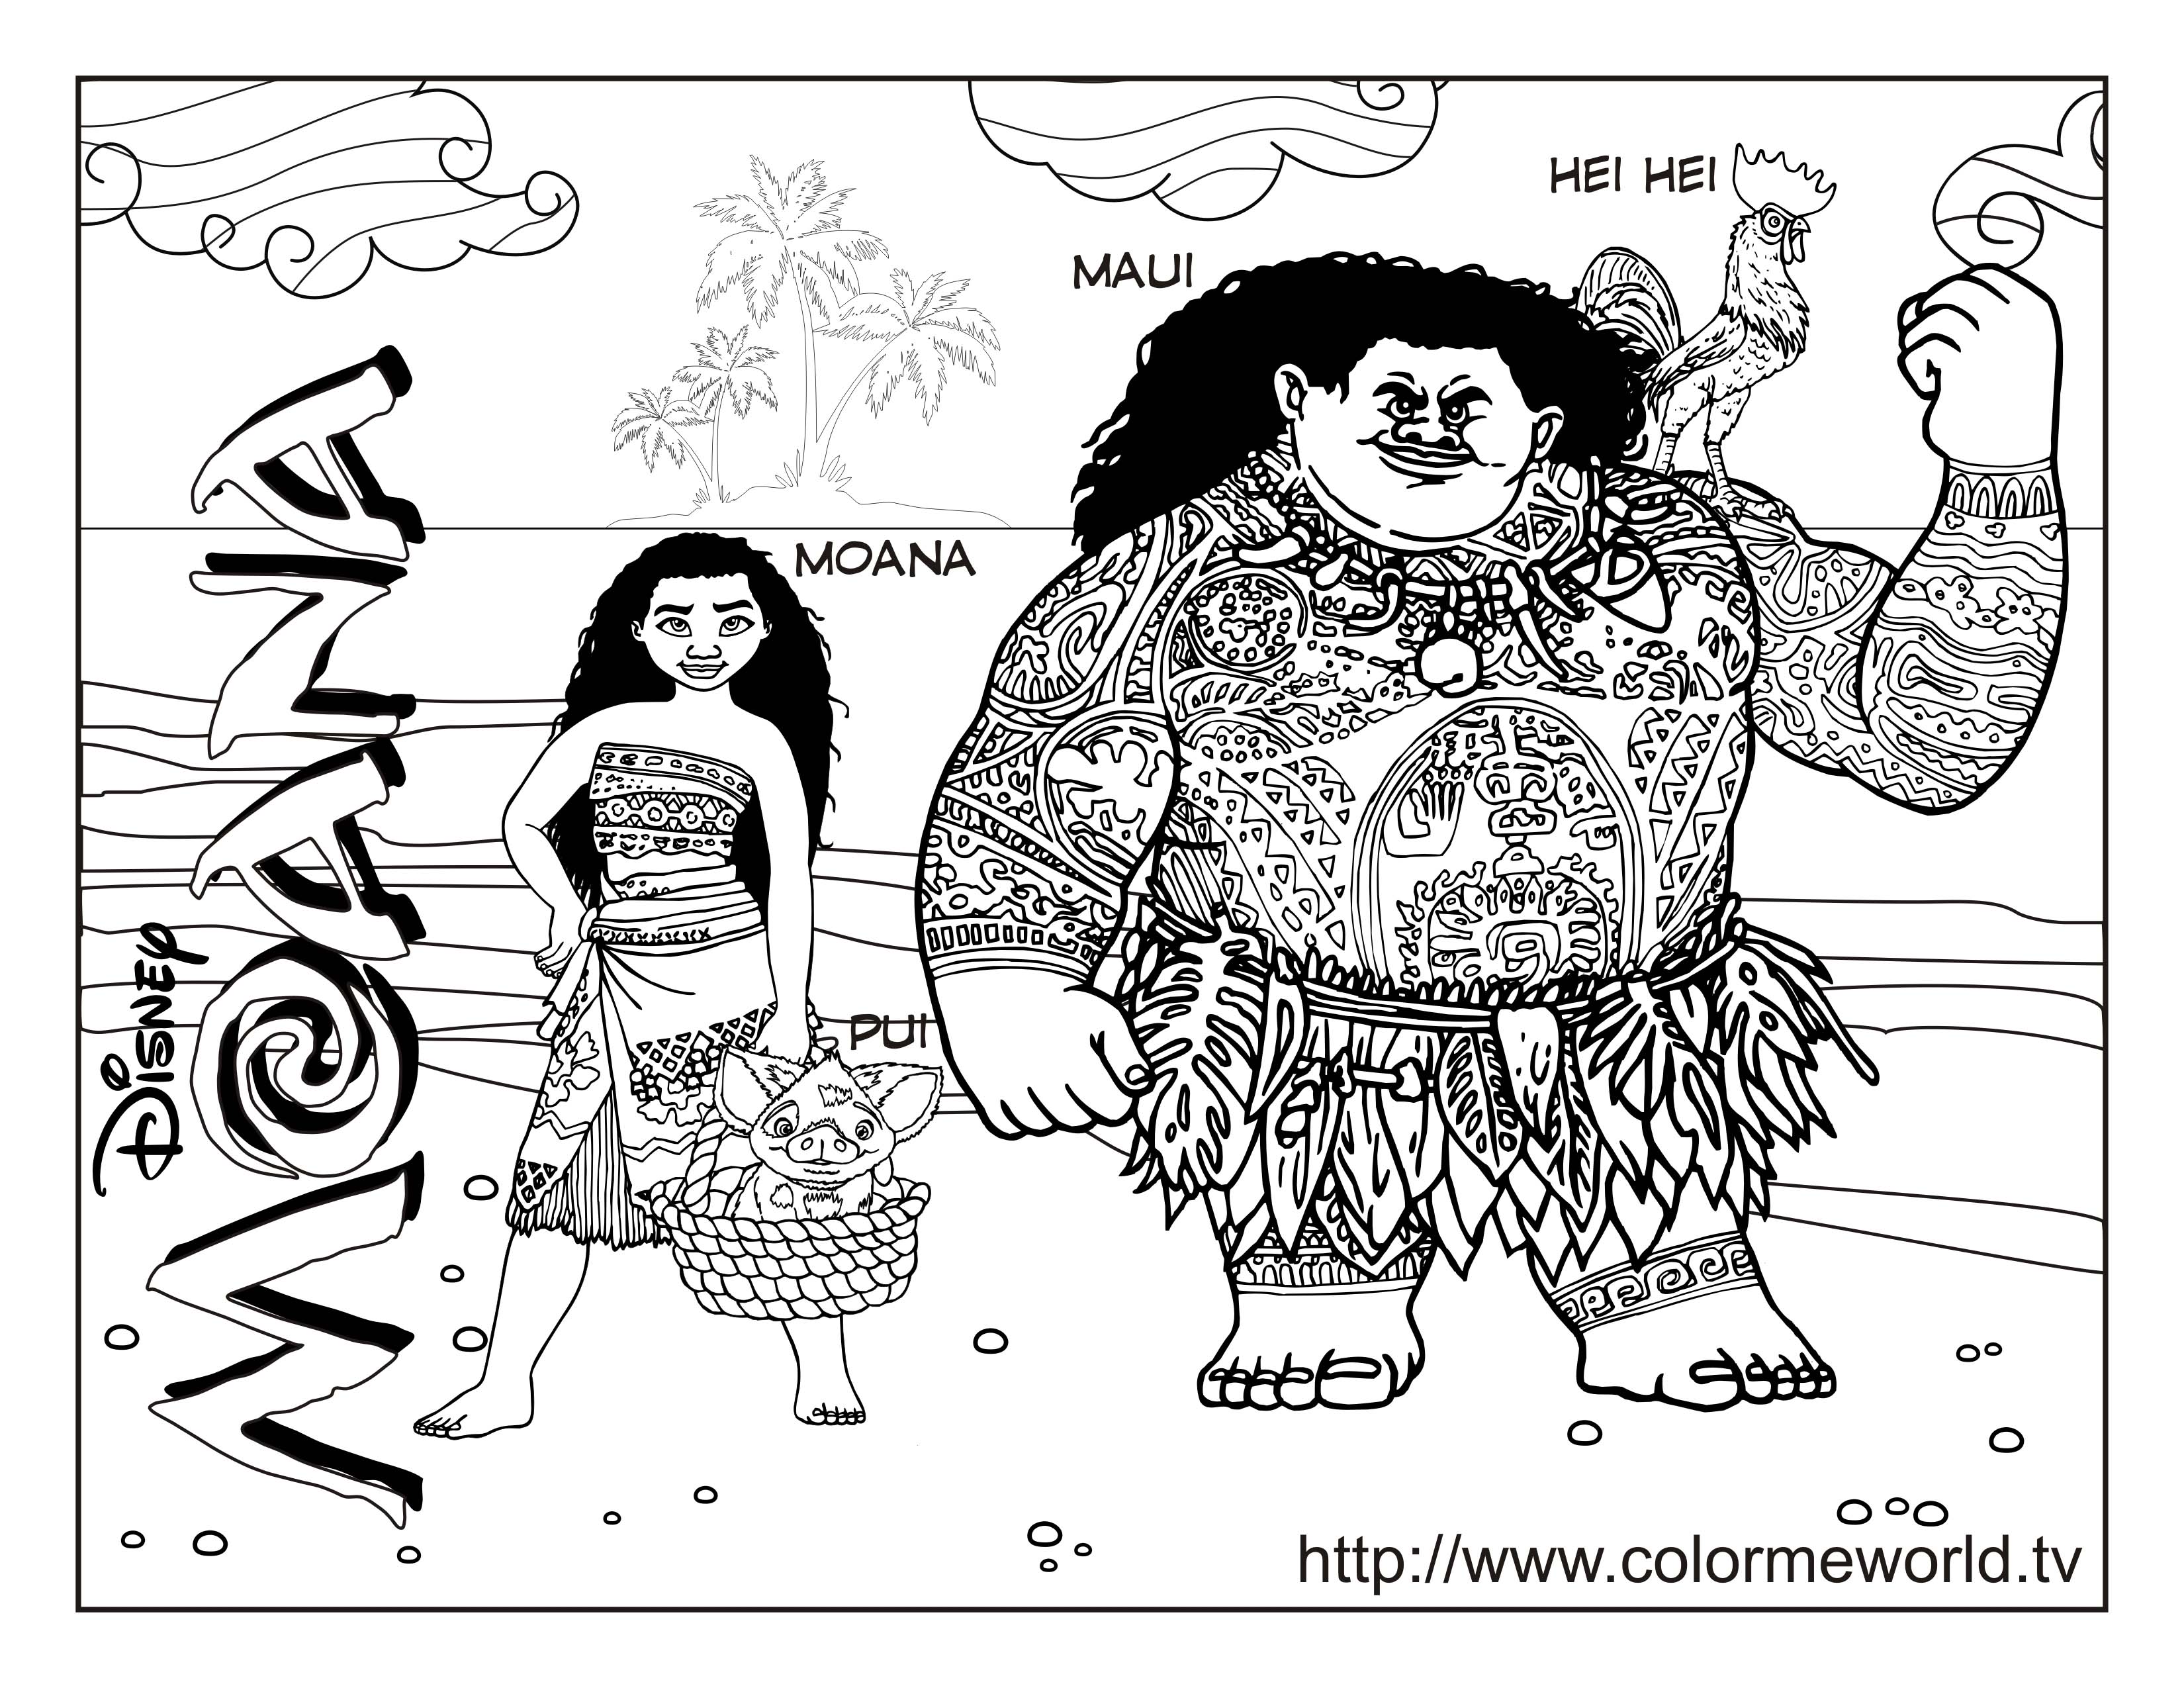 Moana to color for children - Moana Kids Coloring Pages